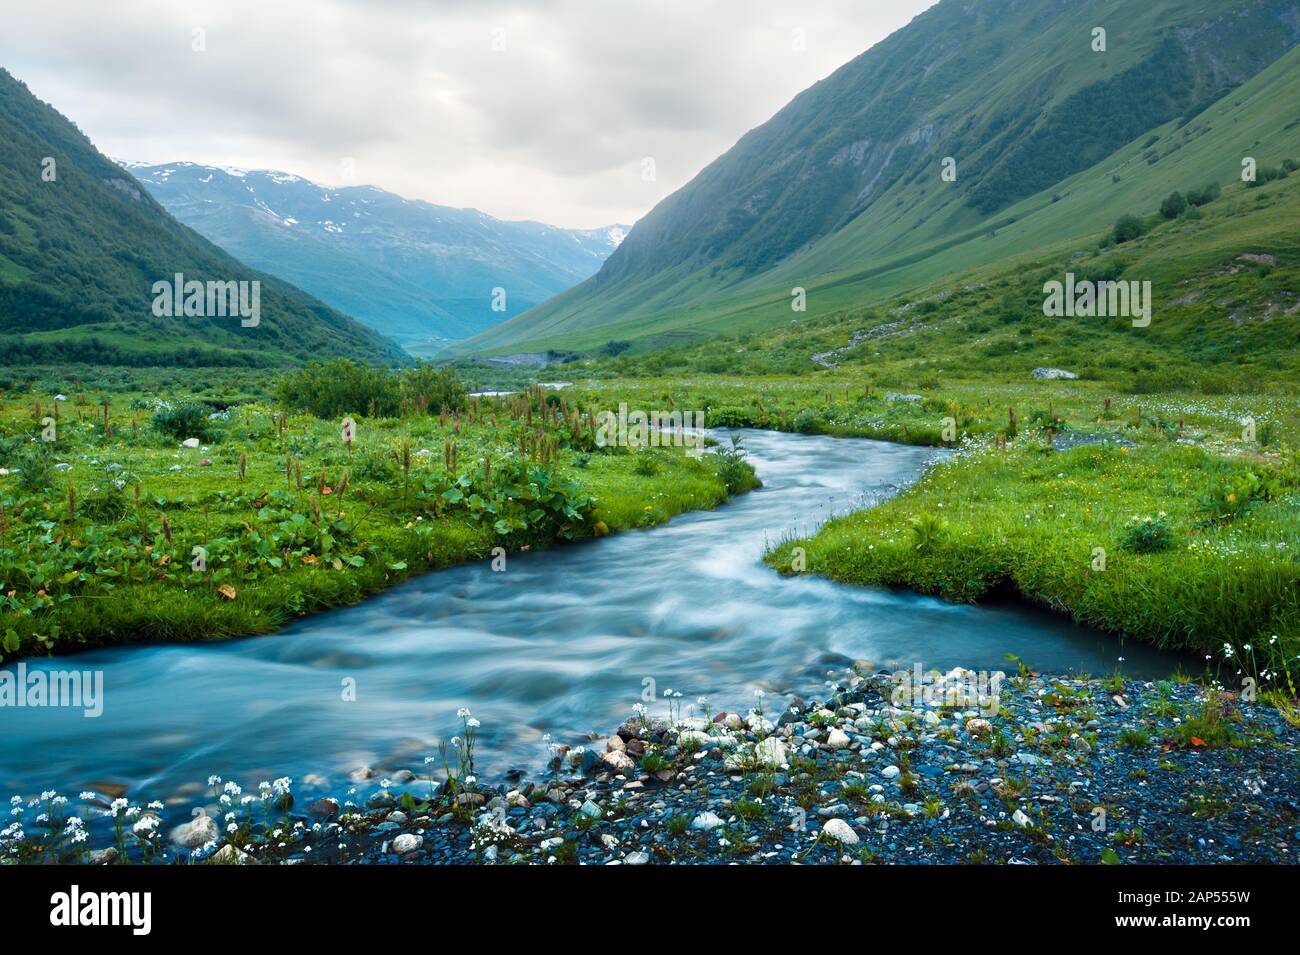 Amazing landscape with river and green grass in spring Caucasus mountains Stock Photo